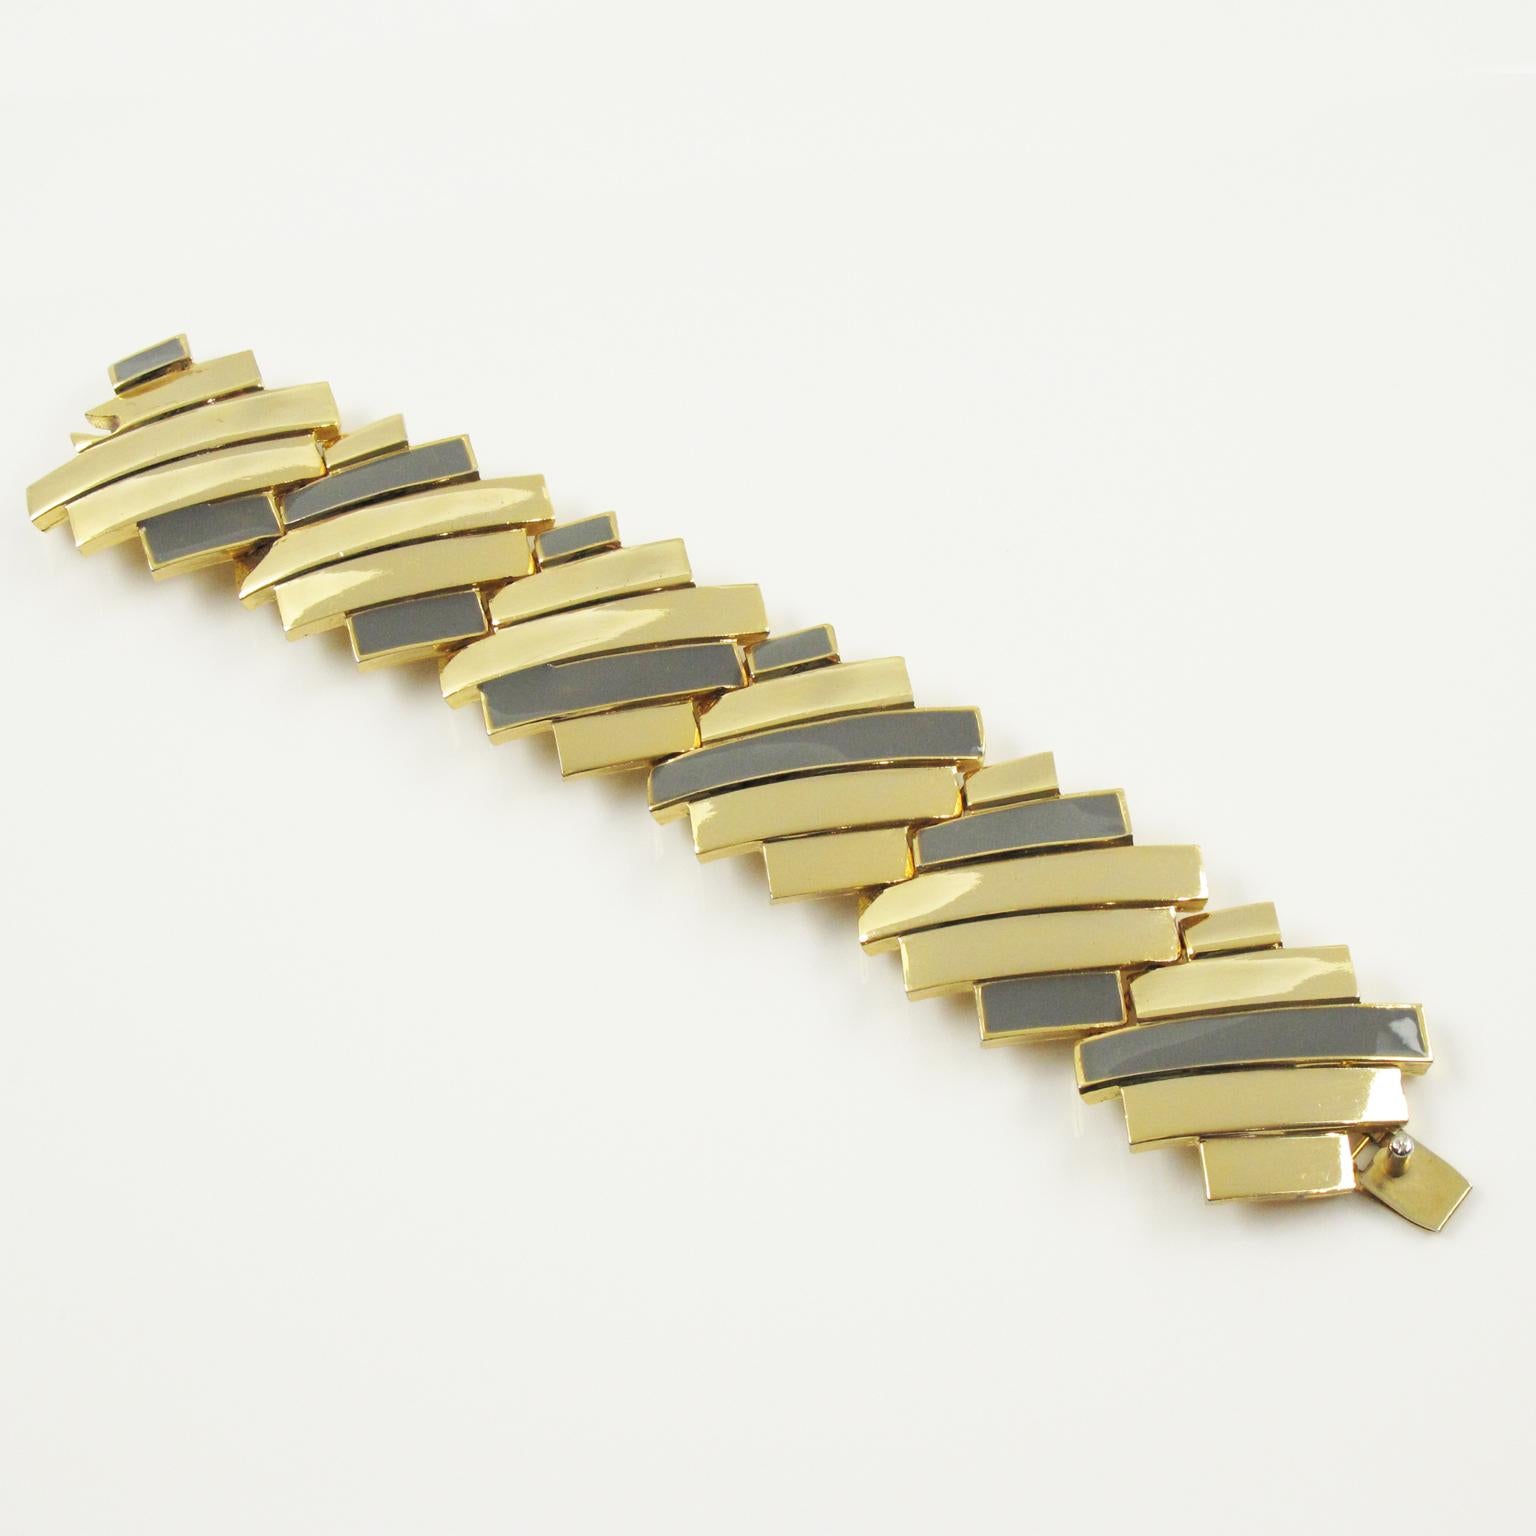 This elegant Lanvin Paris modernist link bracelet is a statement piece from the early 1970s featuring a massive gilded metal carved bangle in futuristic design compliments with gray enamel. The Lanvin Paris gilt tag is on the underside. The locking